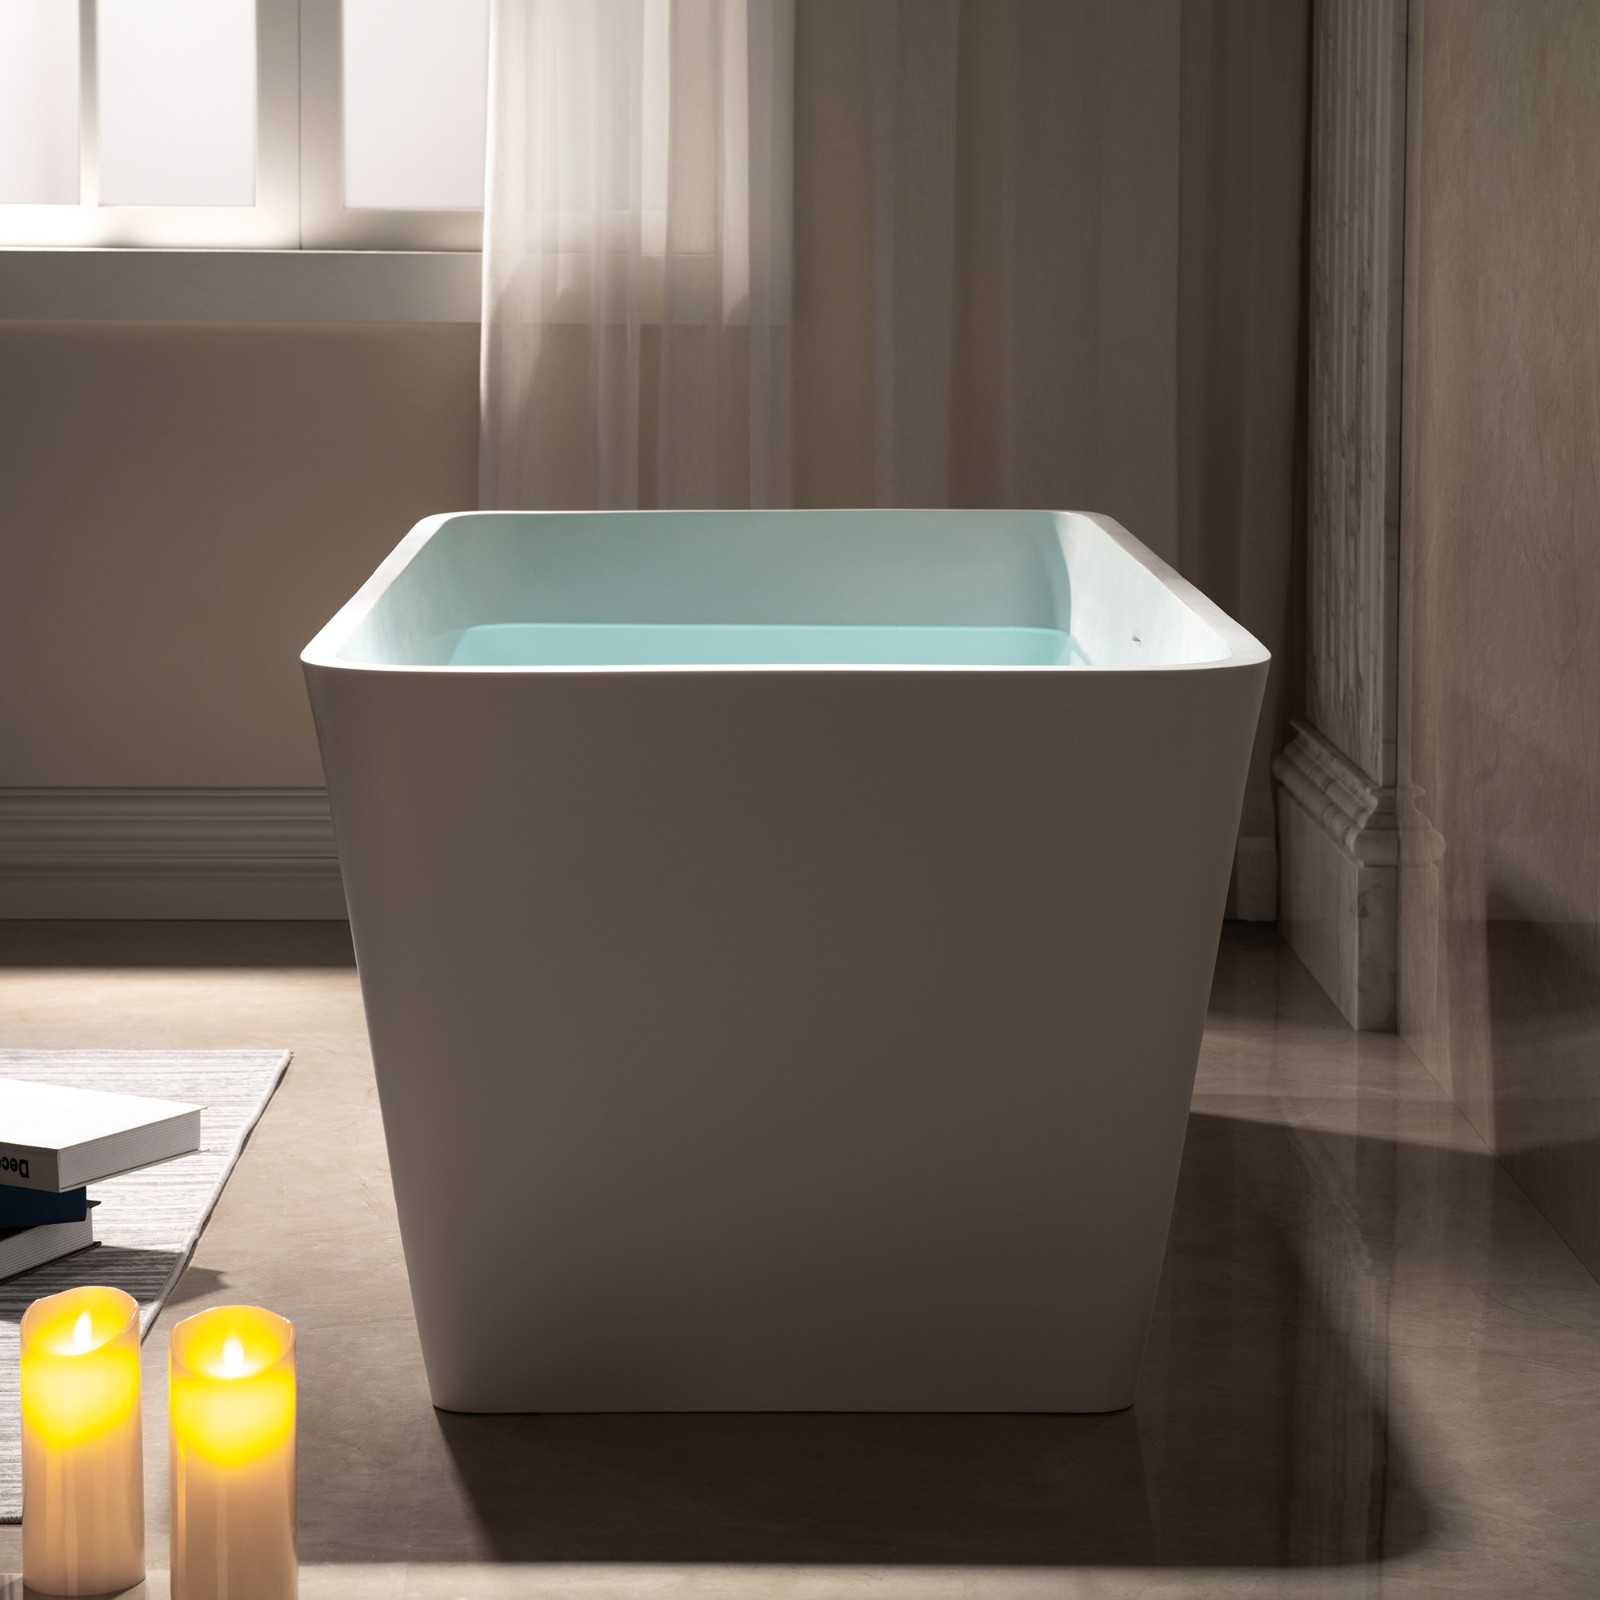  WOODBRIDGE 59 in. x 27.5 in. Luxury Contemporary Solid Surface Freestanding Bathtub in Matte White_18